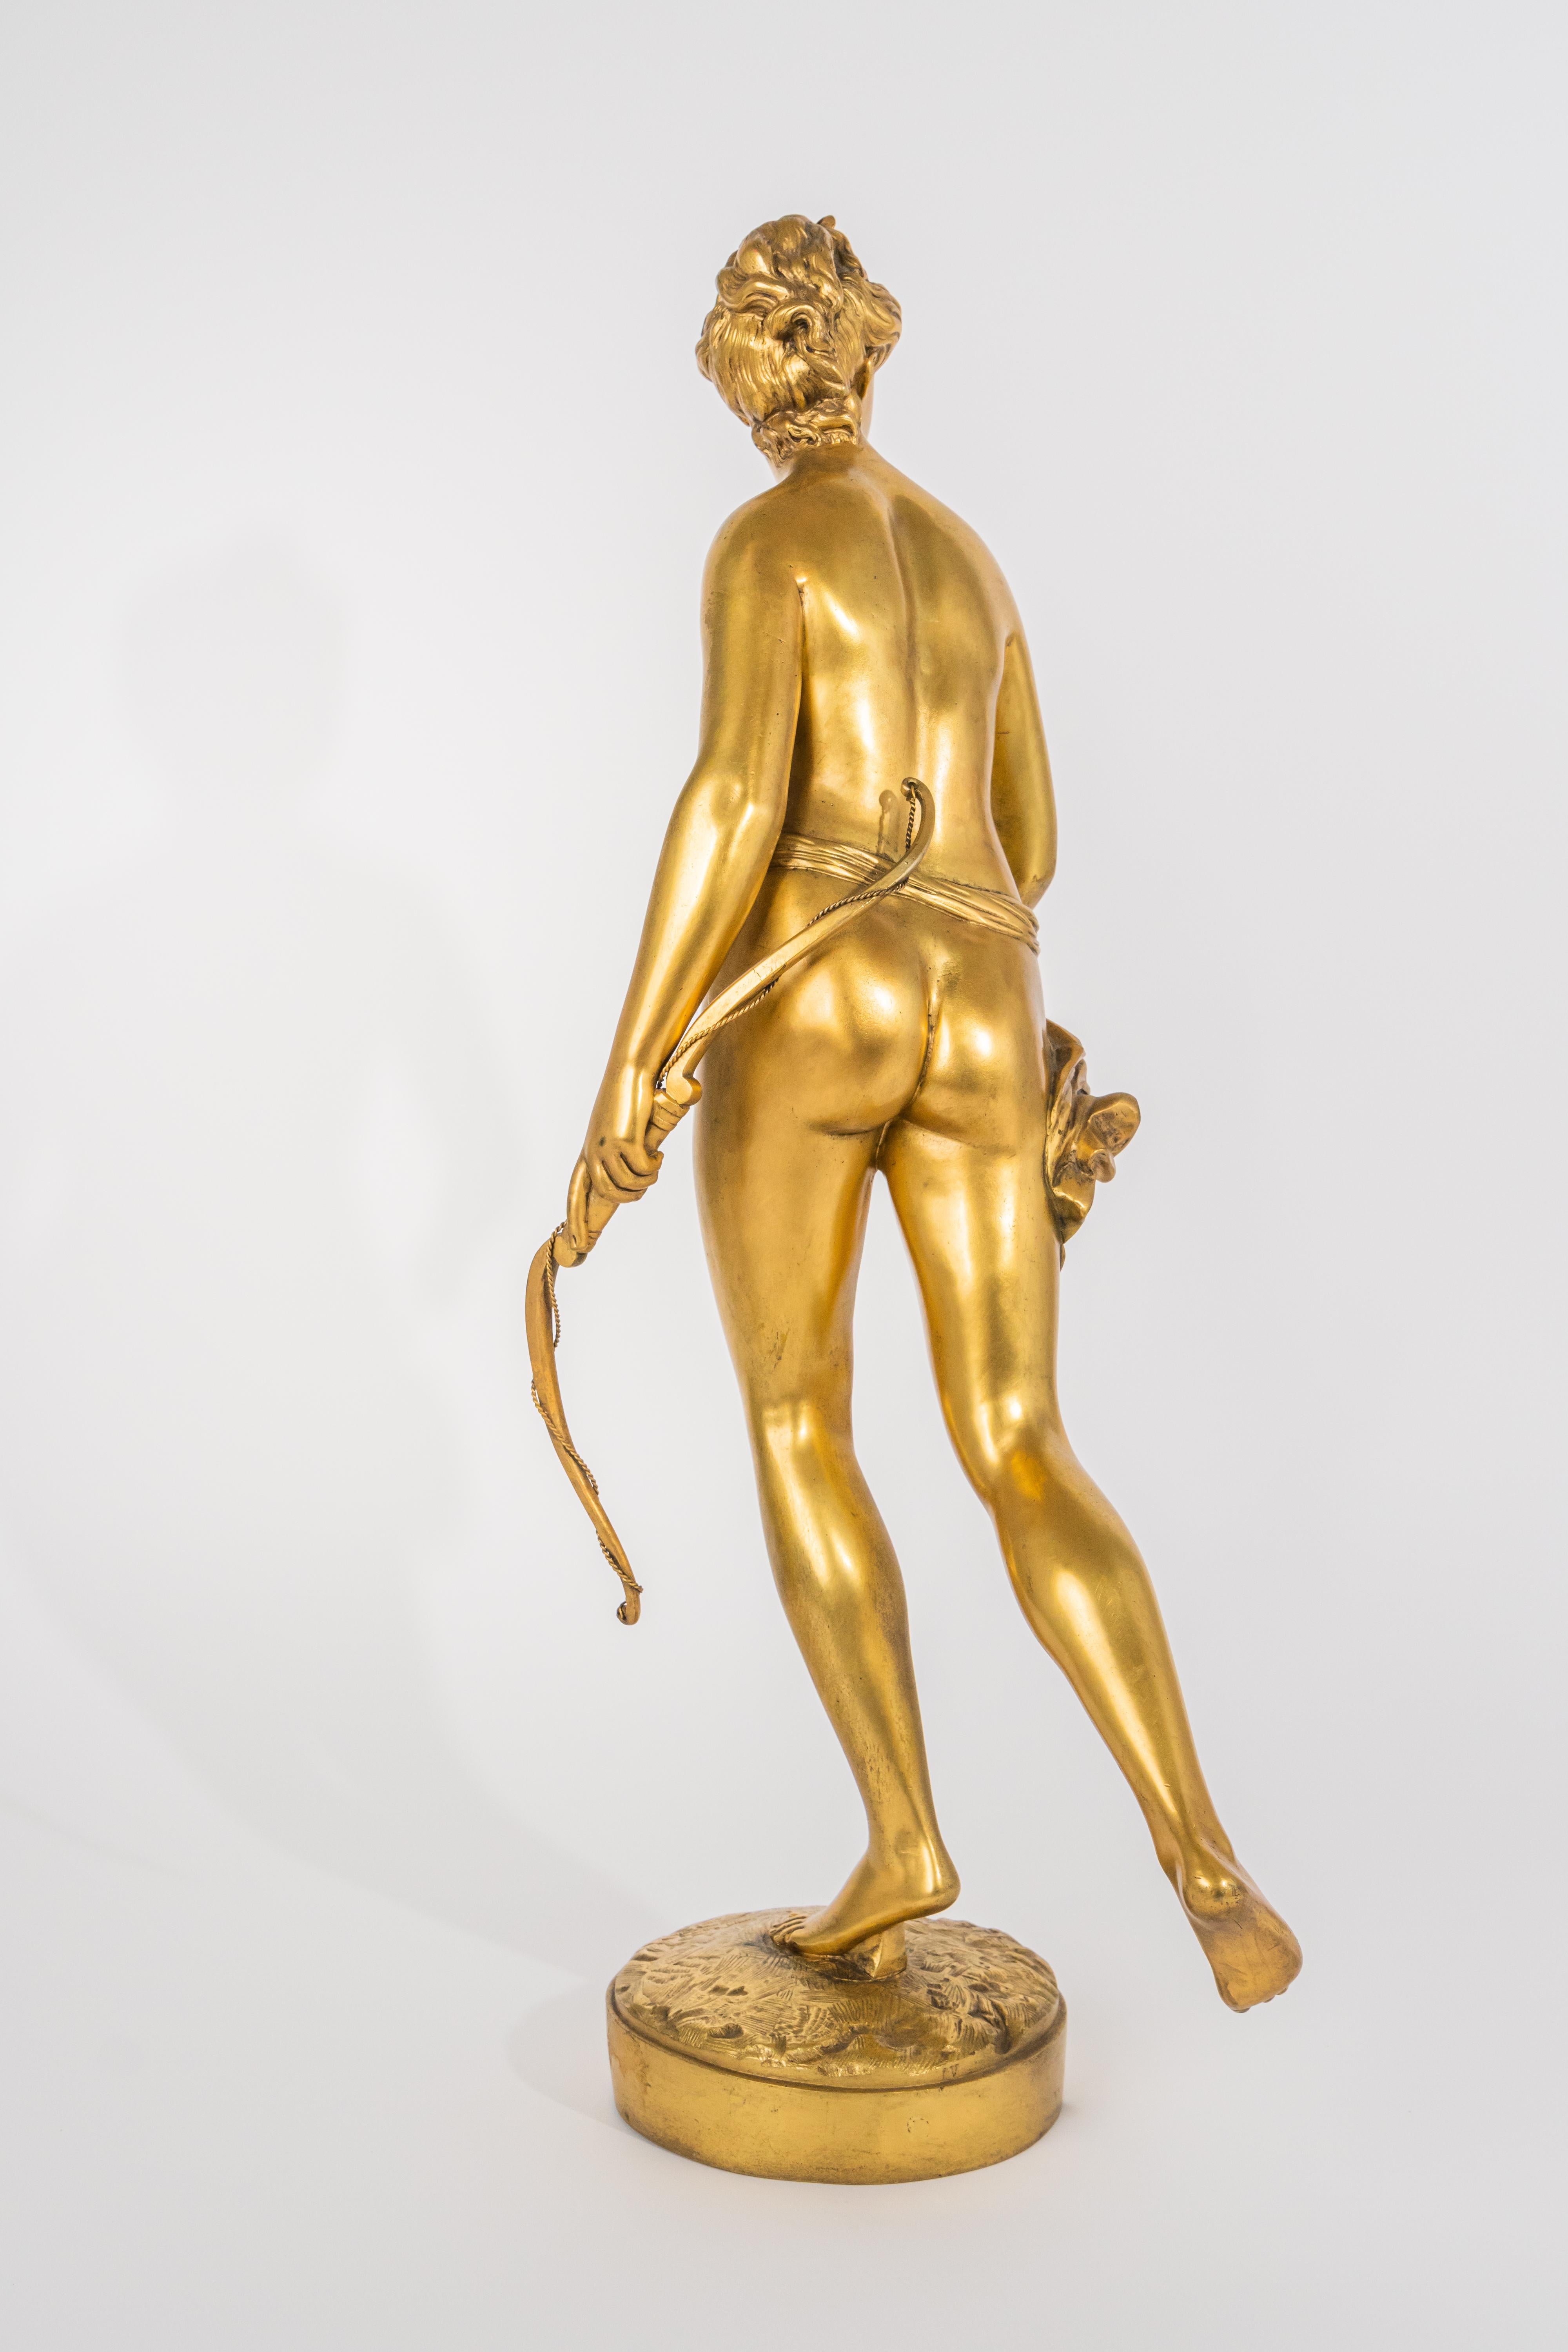 Magnificent 19th C. French gilt bronze Diana the huntress after the model of Jean-Antoine Houdon (1741-1828)

Measure: H: 24